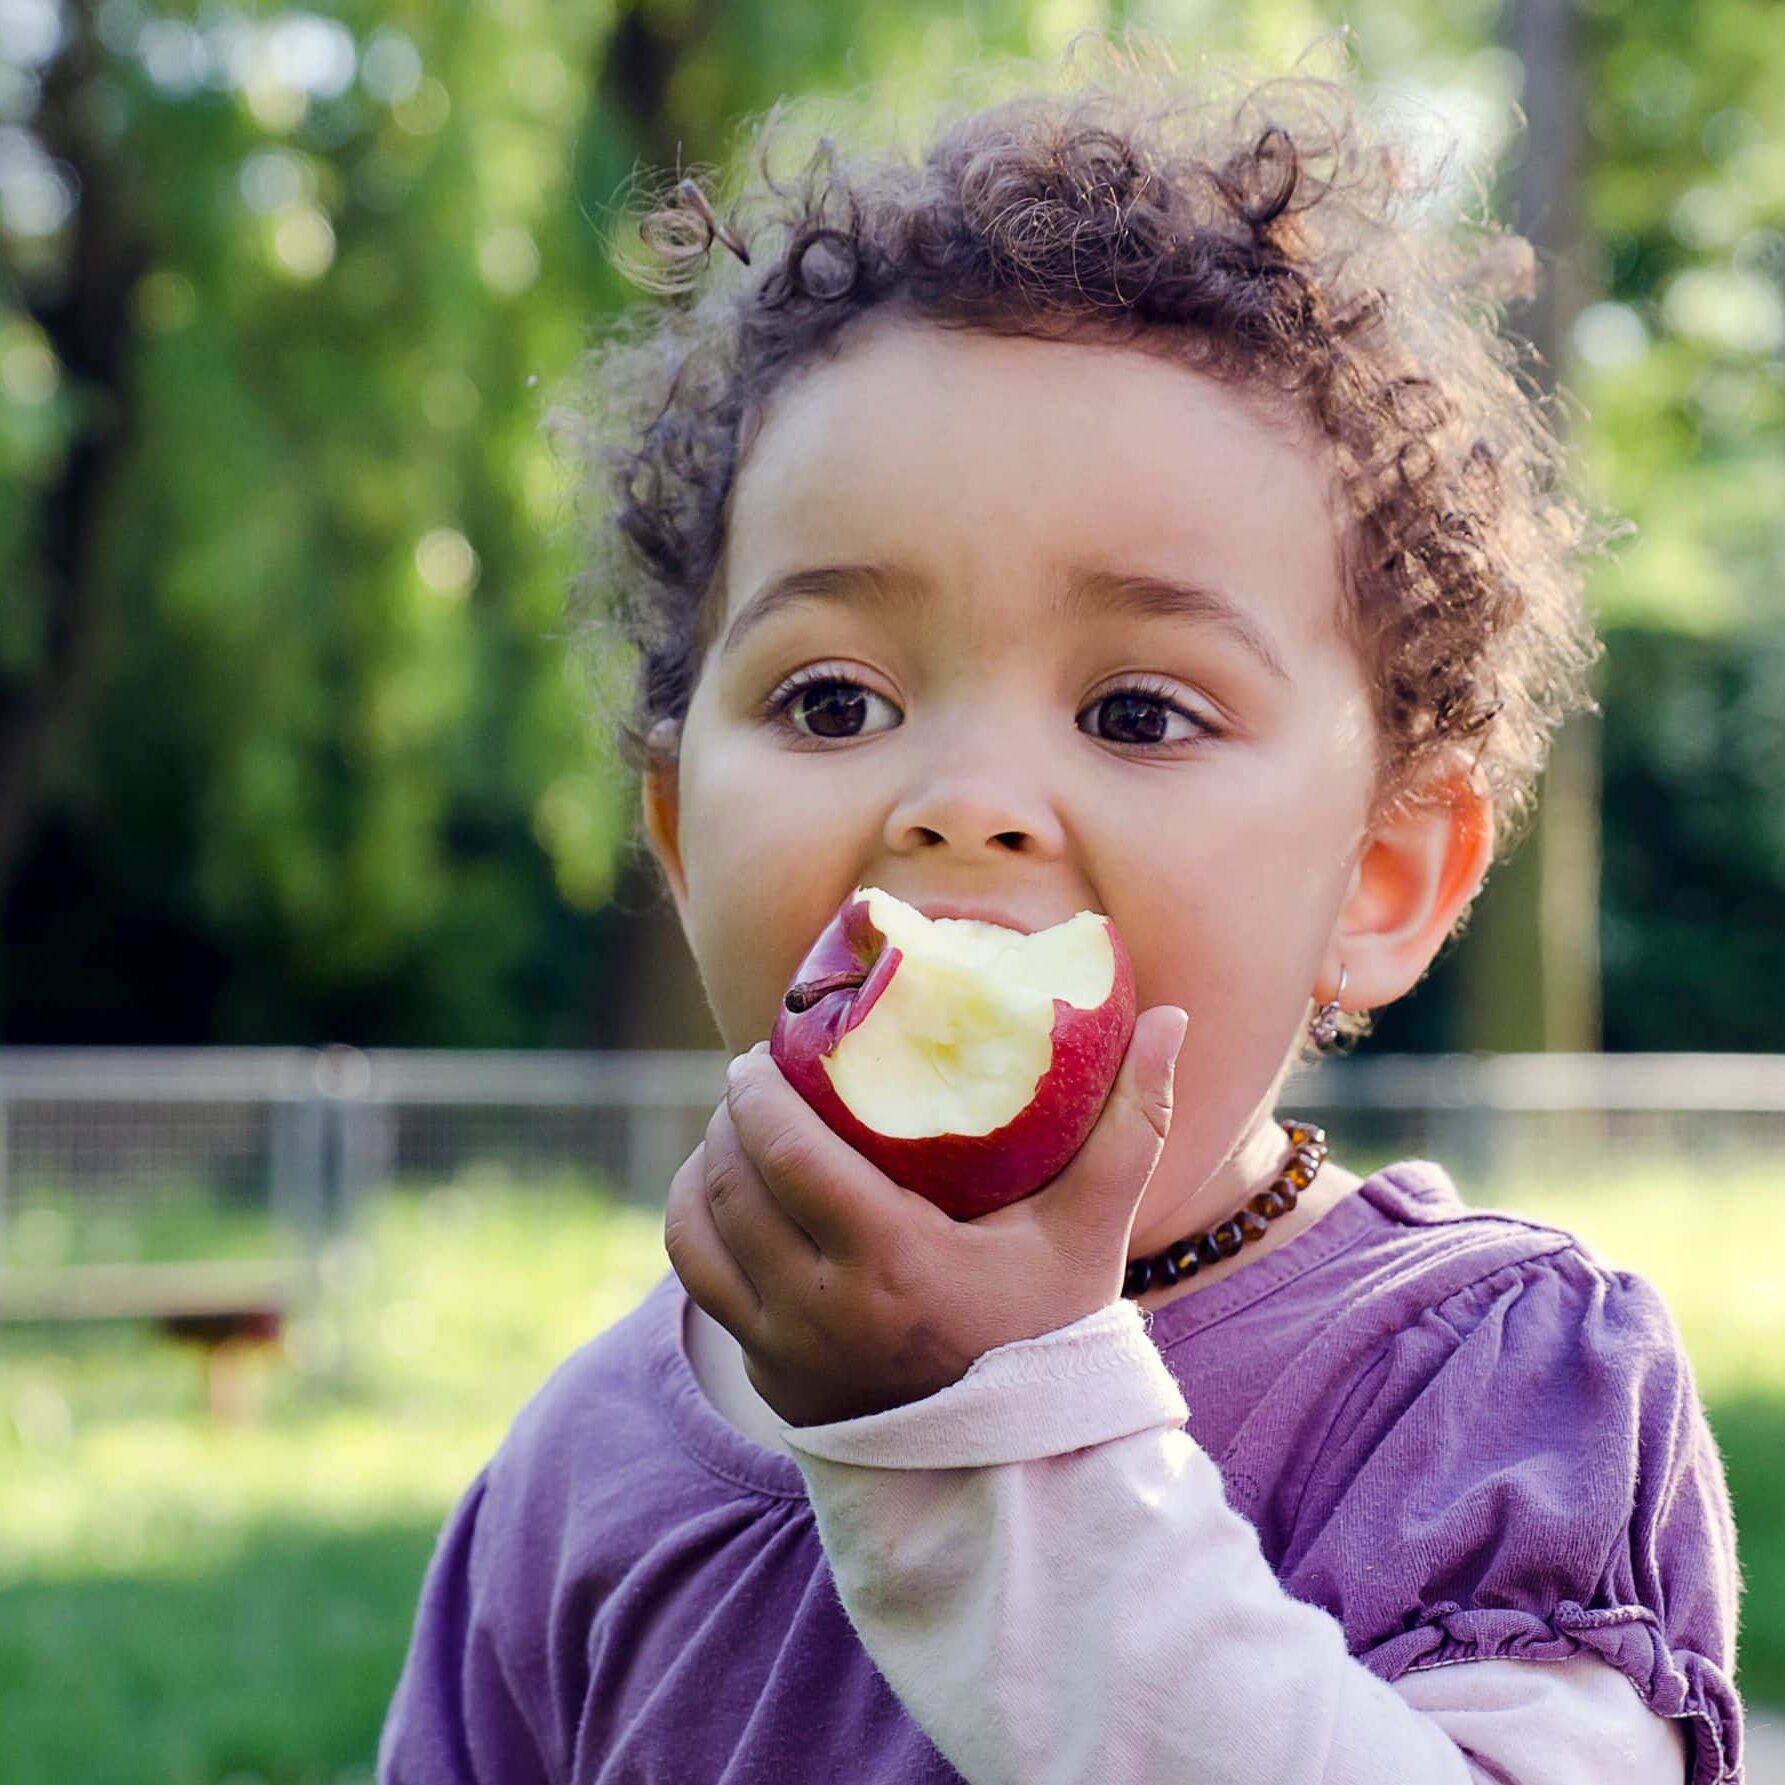 young child eating an apple